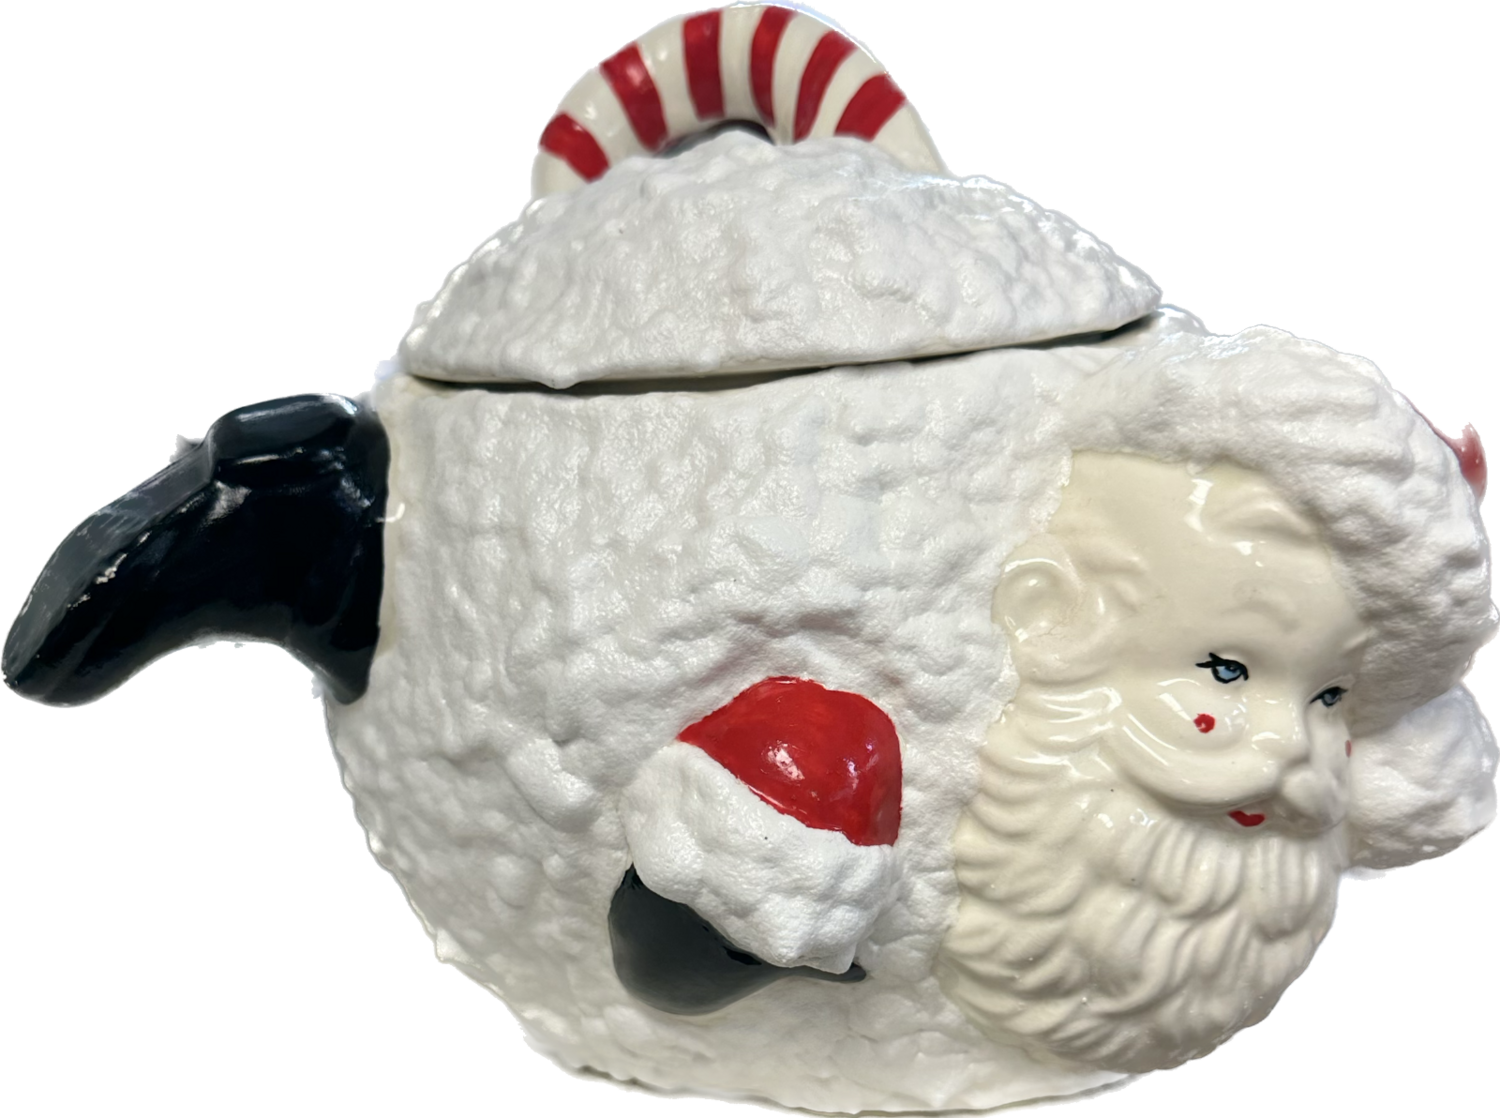 Vintage Ceramic Santa in snowball cookie jar / canister Christmas candy cane